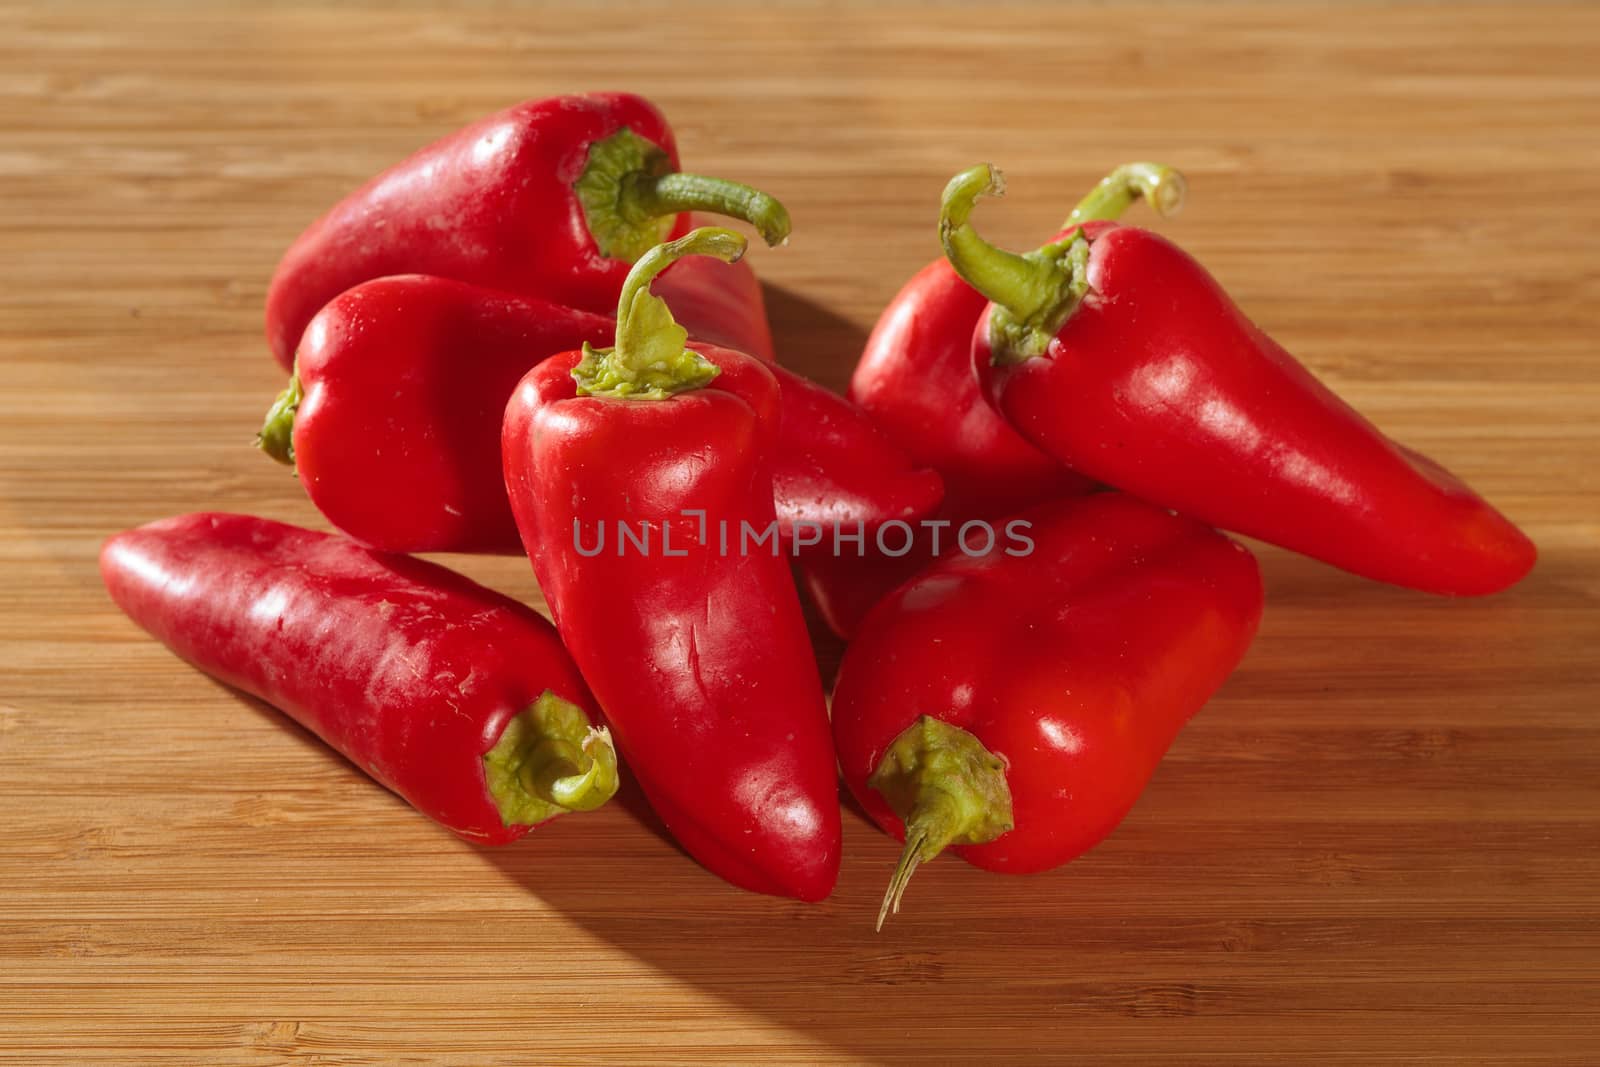 Small red peppers by RnDmS